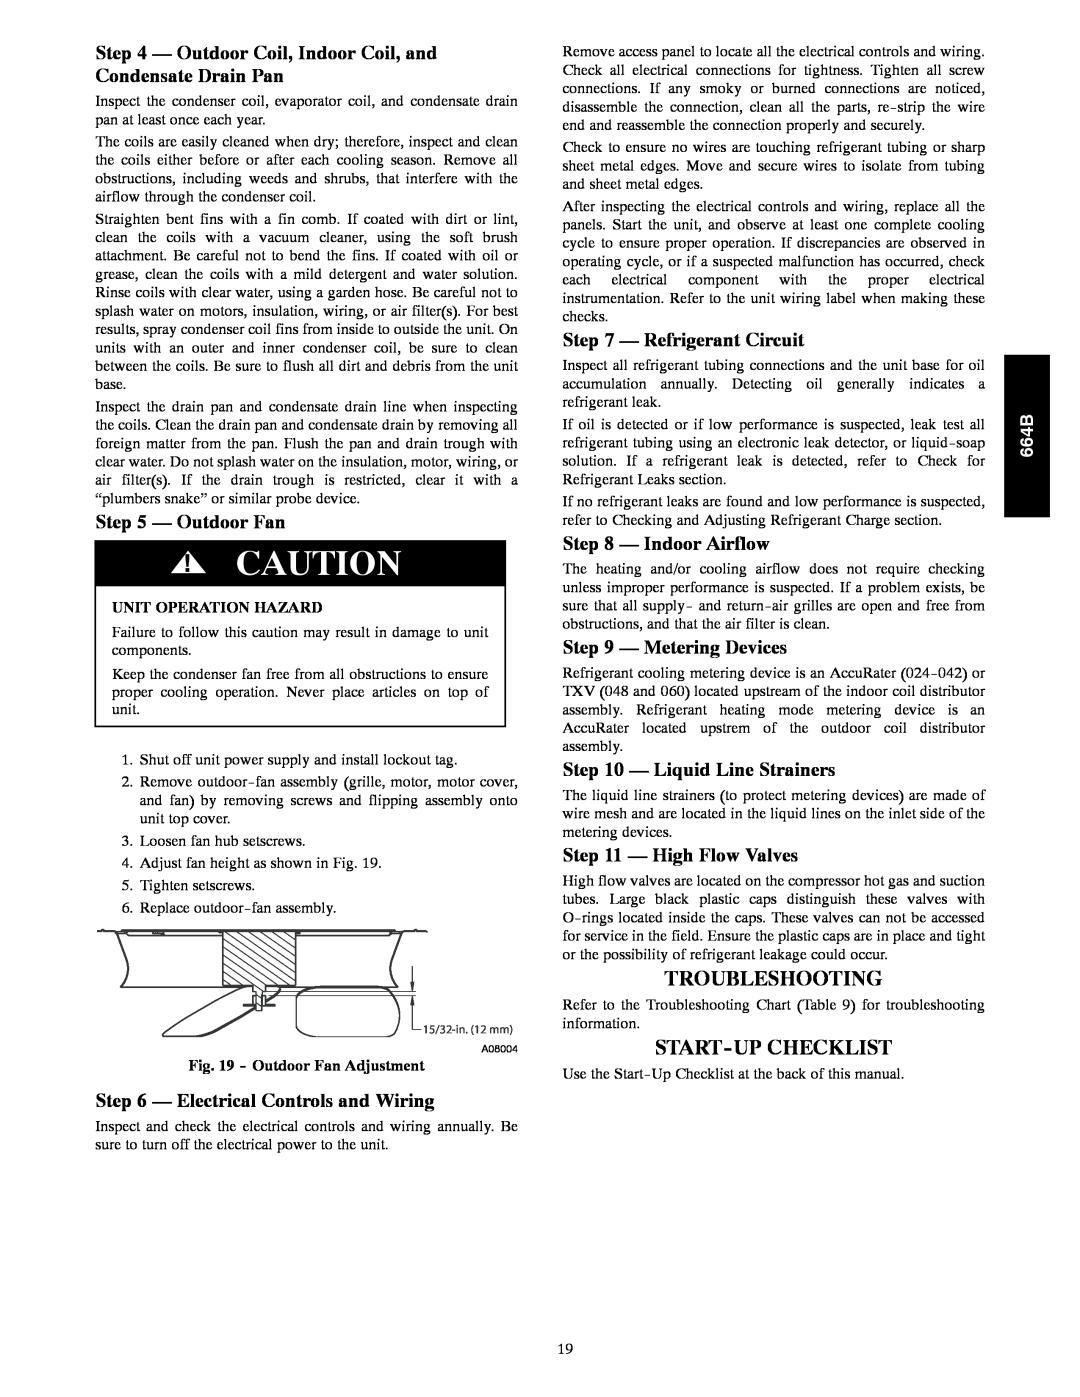 Bryant 664B Troubleshooting, Start-Upchecklist, Outdoor Fan, Electrical Controls and Wiring, Refrigerant Circuit 